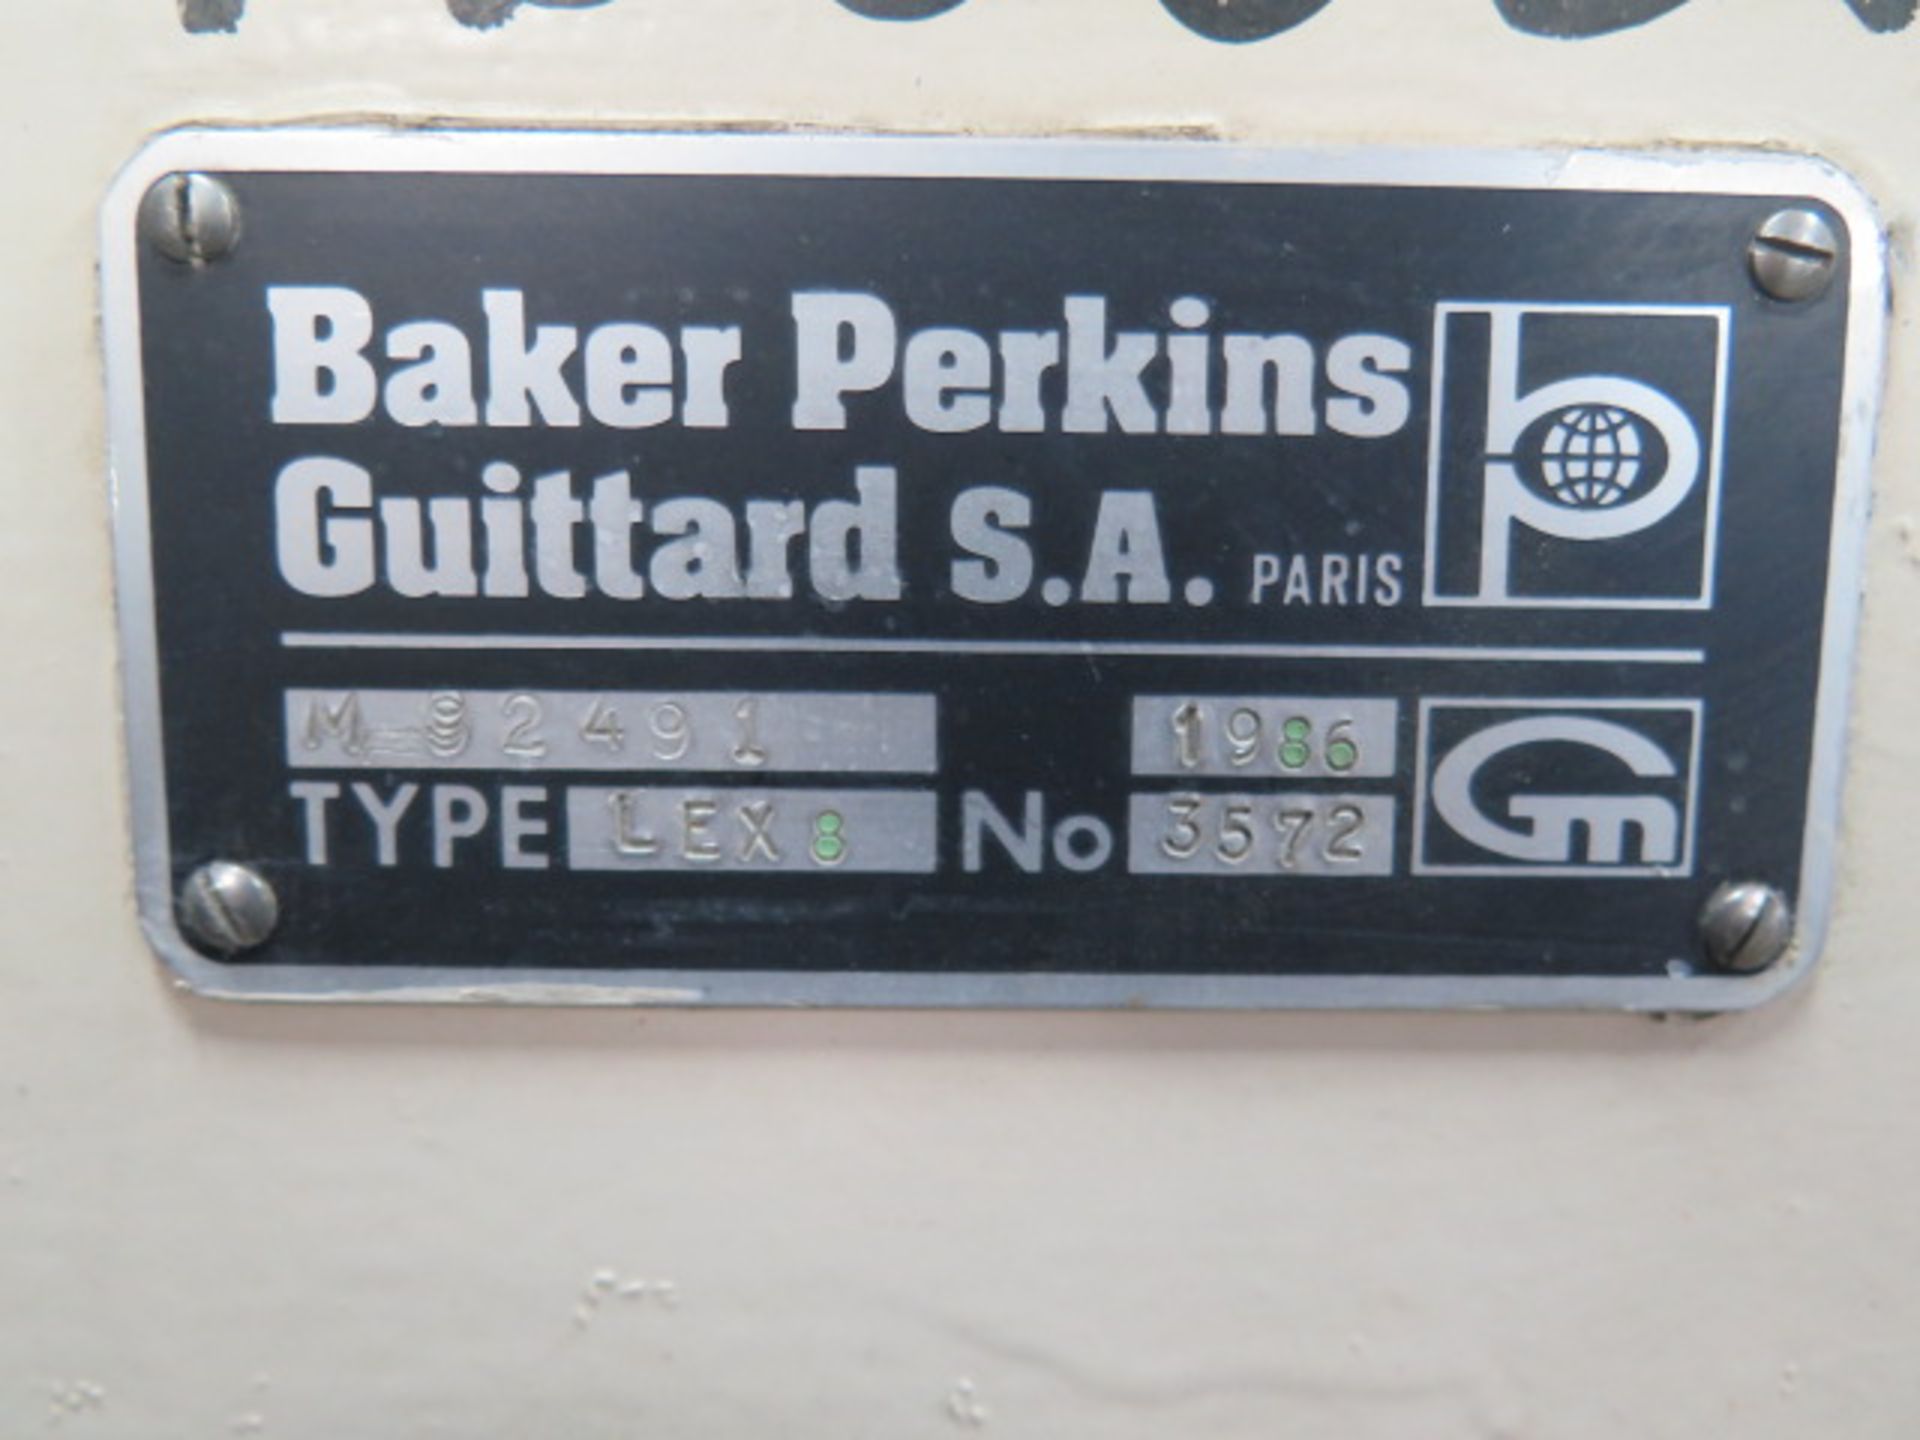 Barker Perkins LEX8 Mixer Extruder s/n 3572 (SOLD AS-IS - NO WARRANTY) - Image 10 of 10